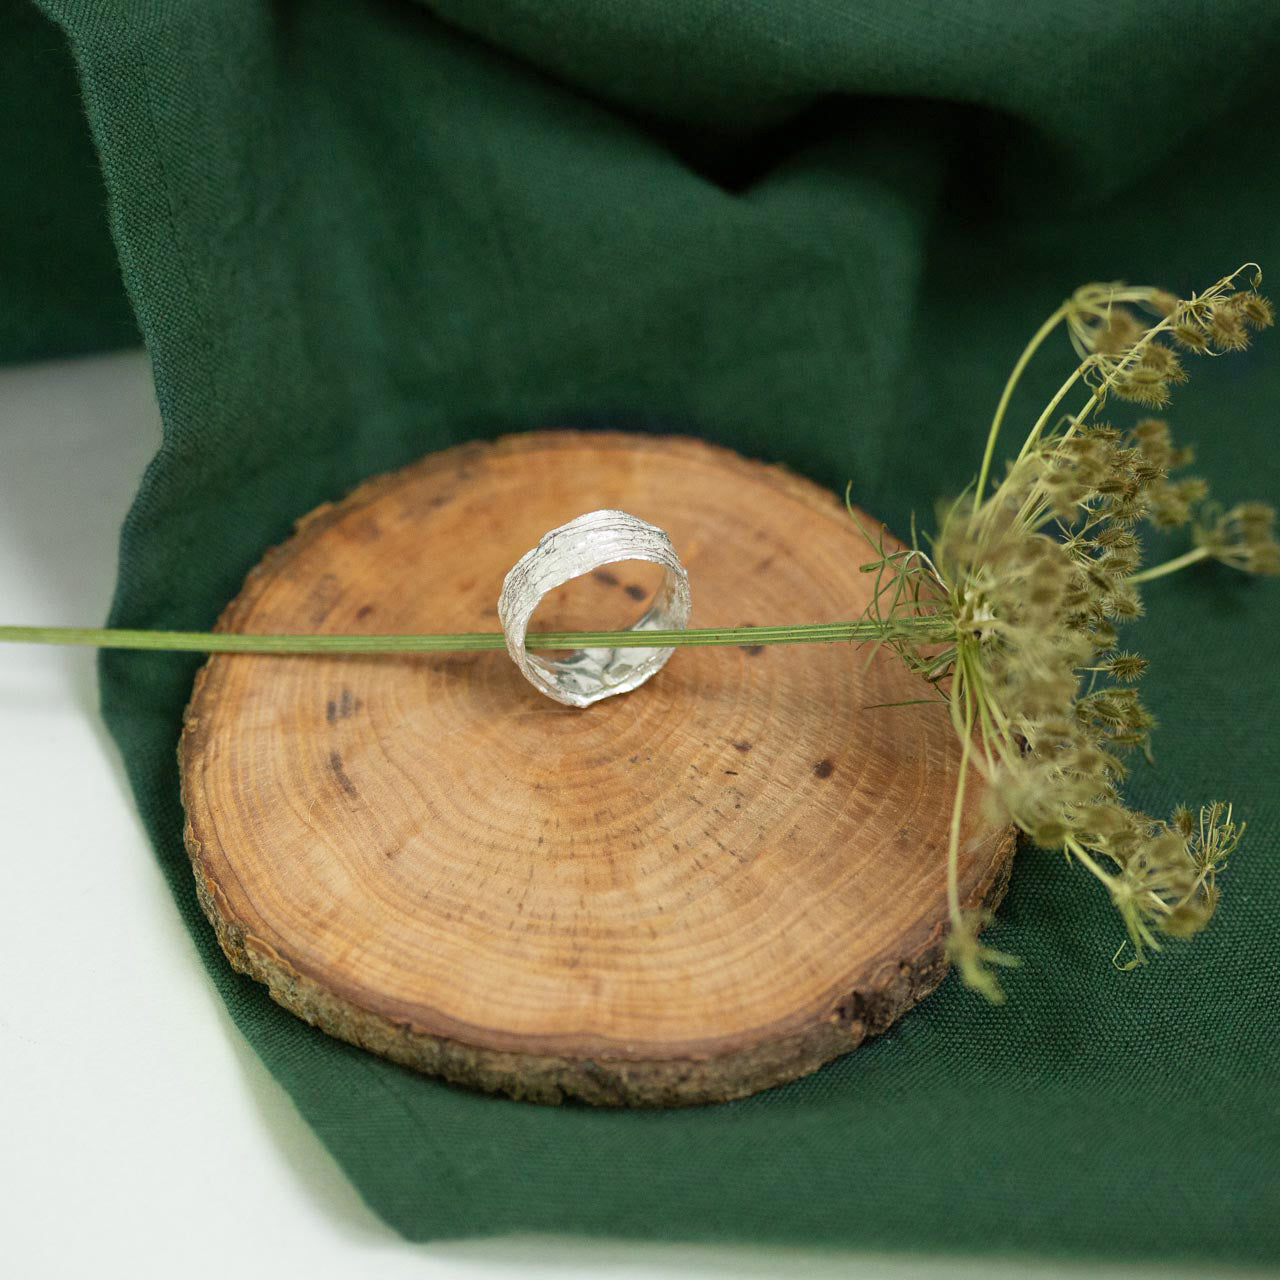 silver Snow Drop Leaf Wrap Ring on wood next to green cloth and dried flora